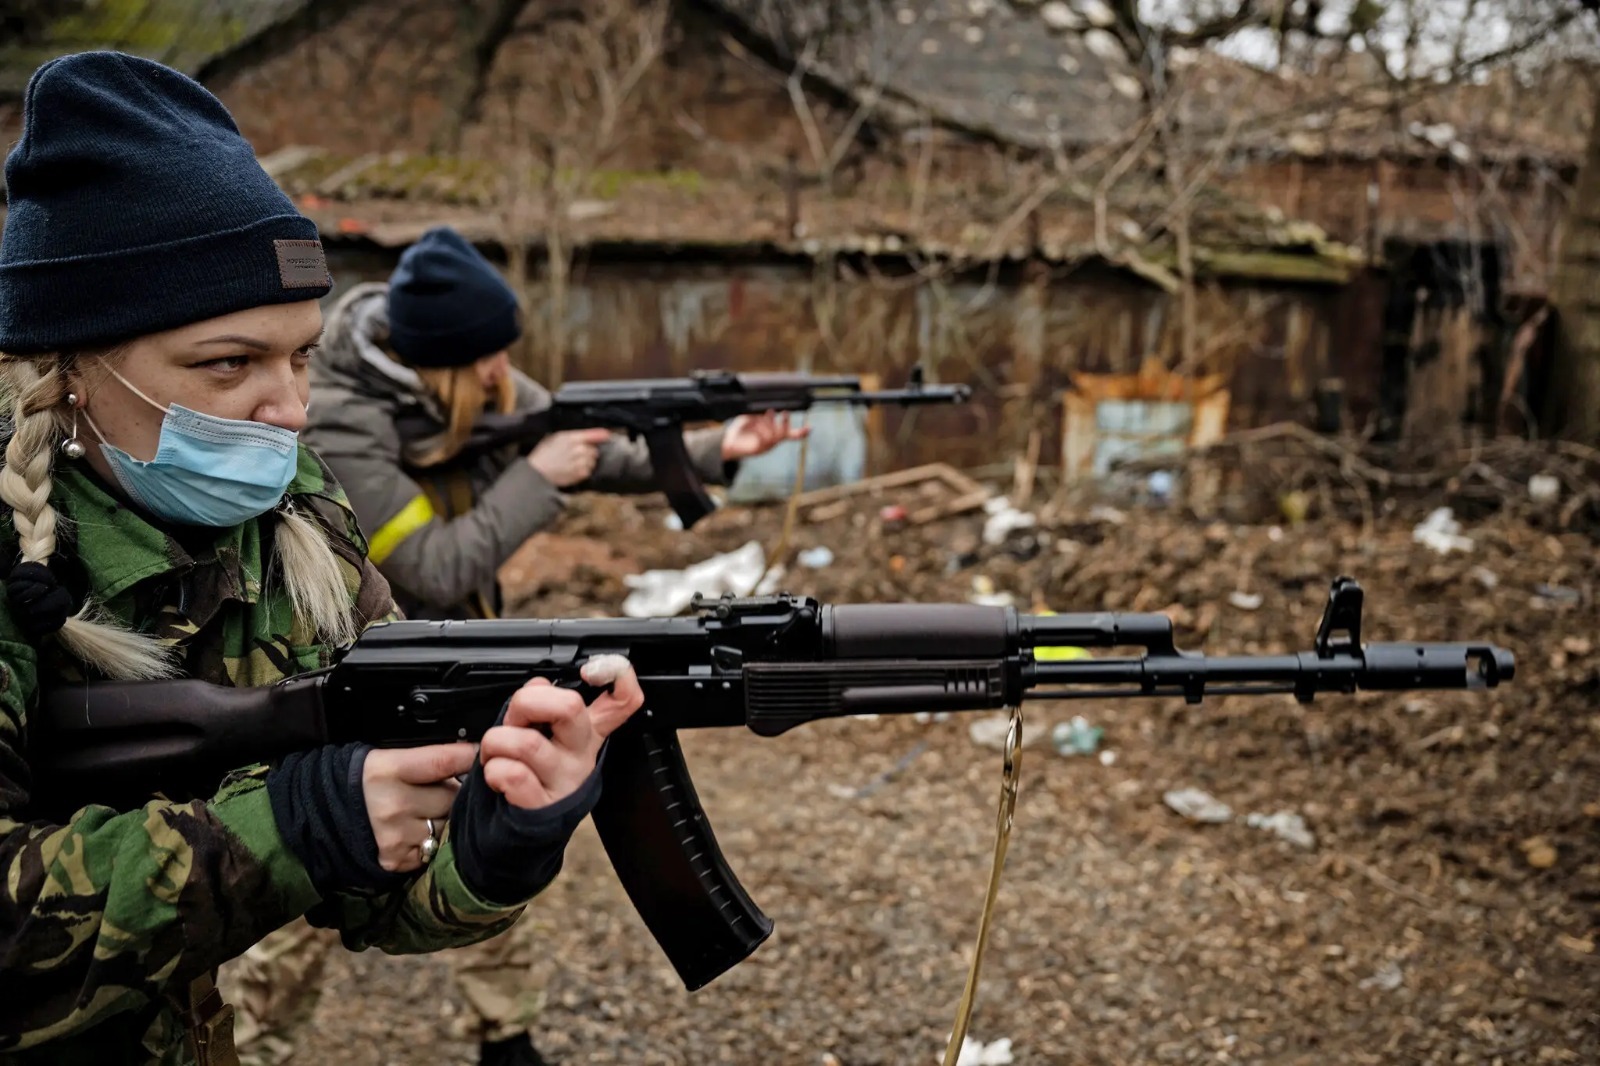 Female Ukrainian volunteer fighters received weapons training in Kyiv as they prepare to confront the Russian forces near the city. - The New York Times